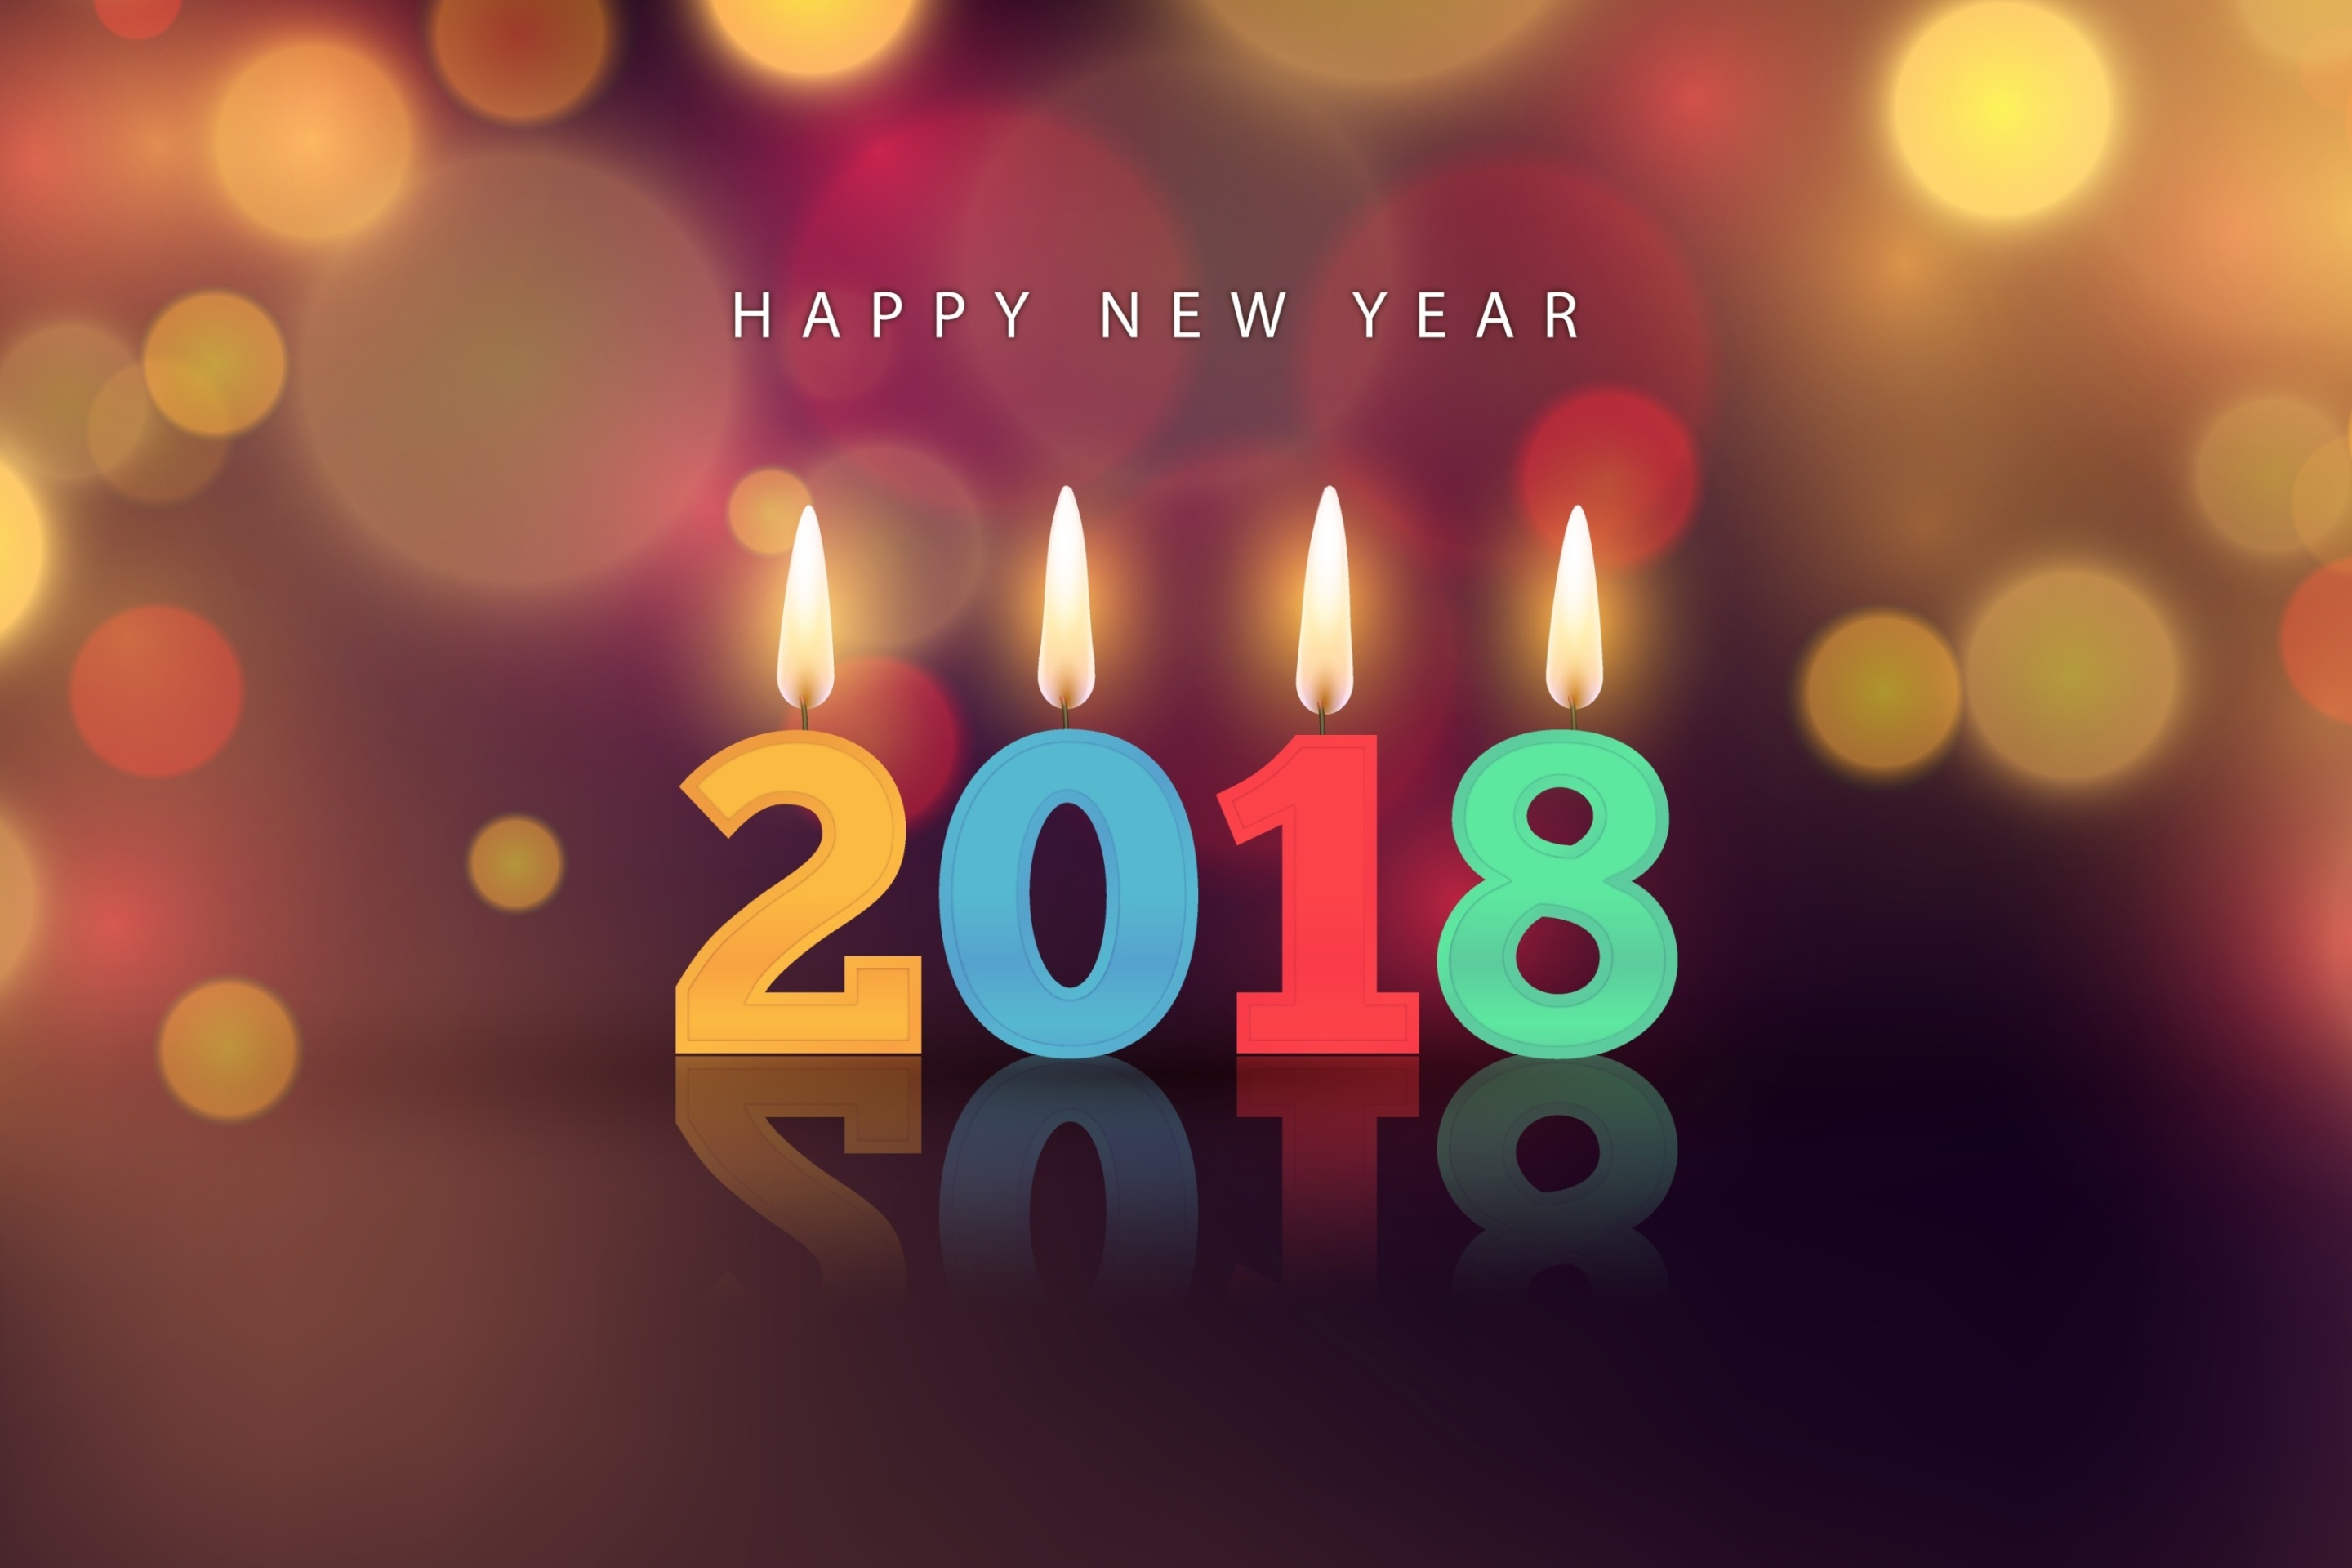 New Year 2018 Greetings Card with Candles wallpaper 2880x1920